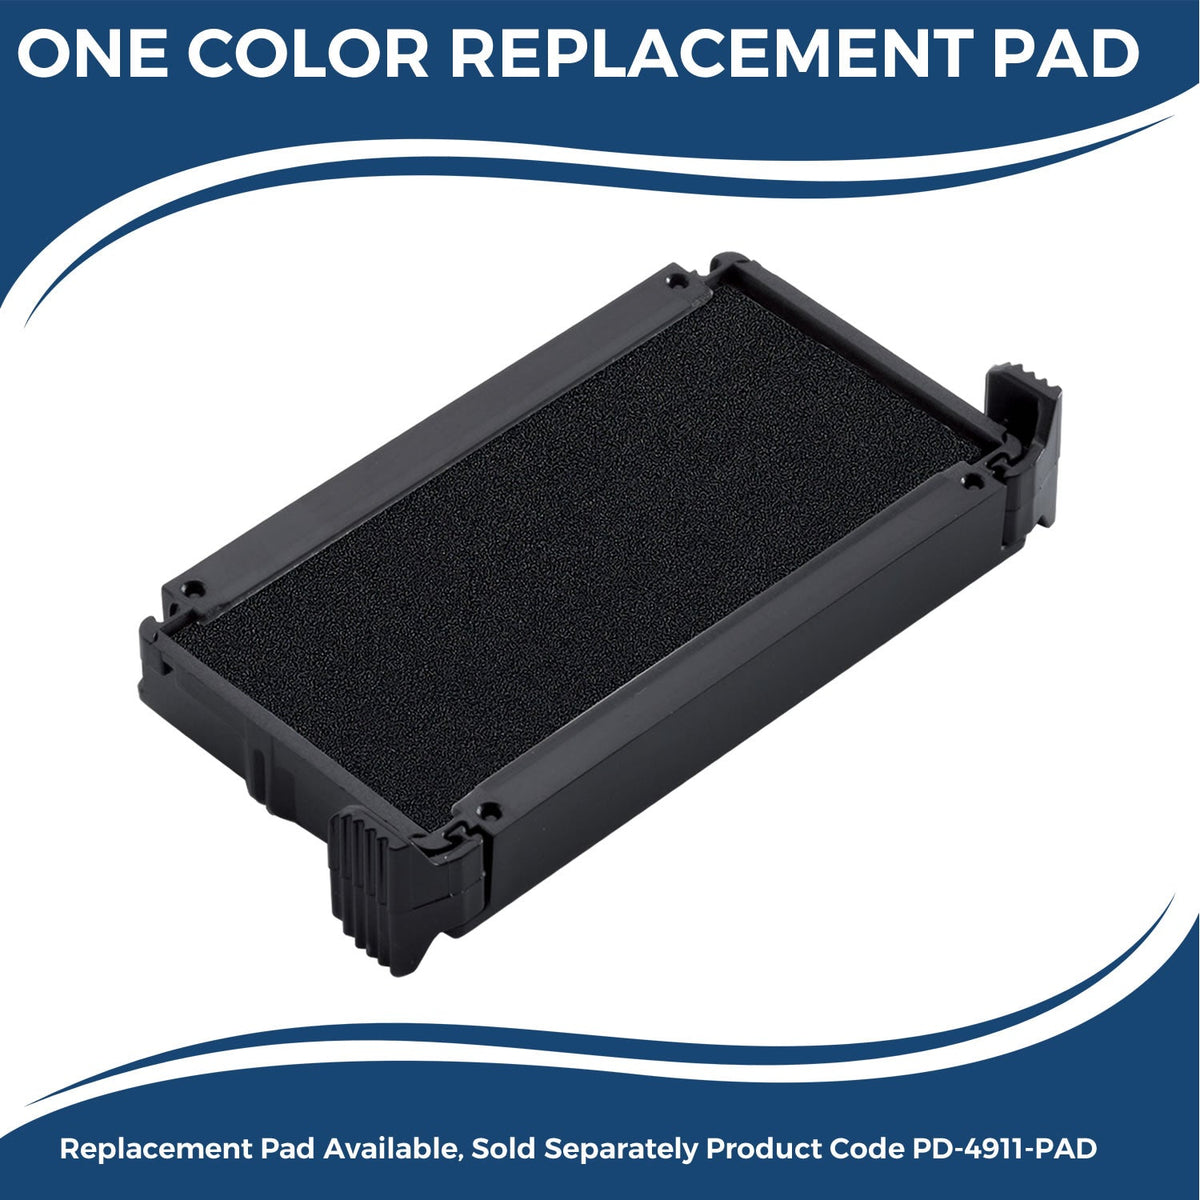 Replacement Pad for Self-Inking Quarantine Stamp